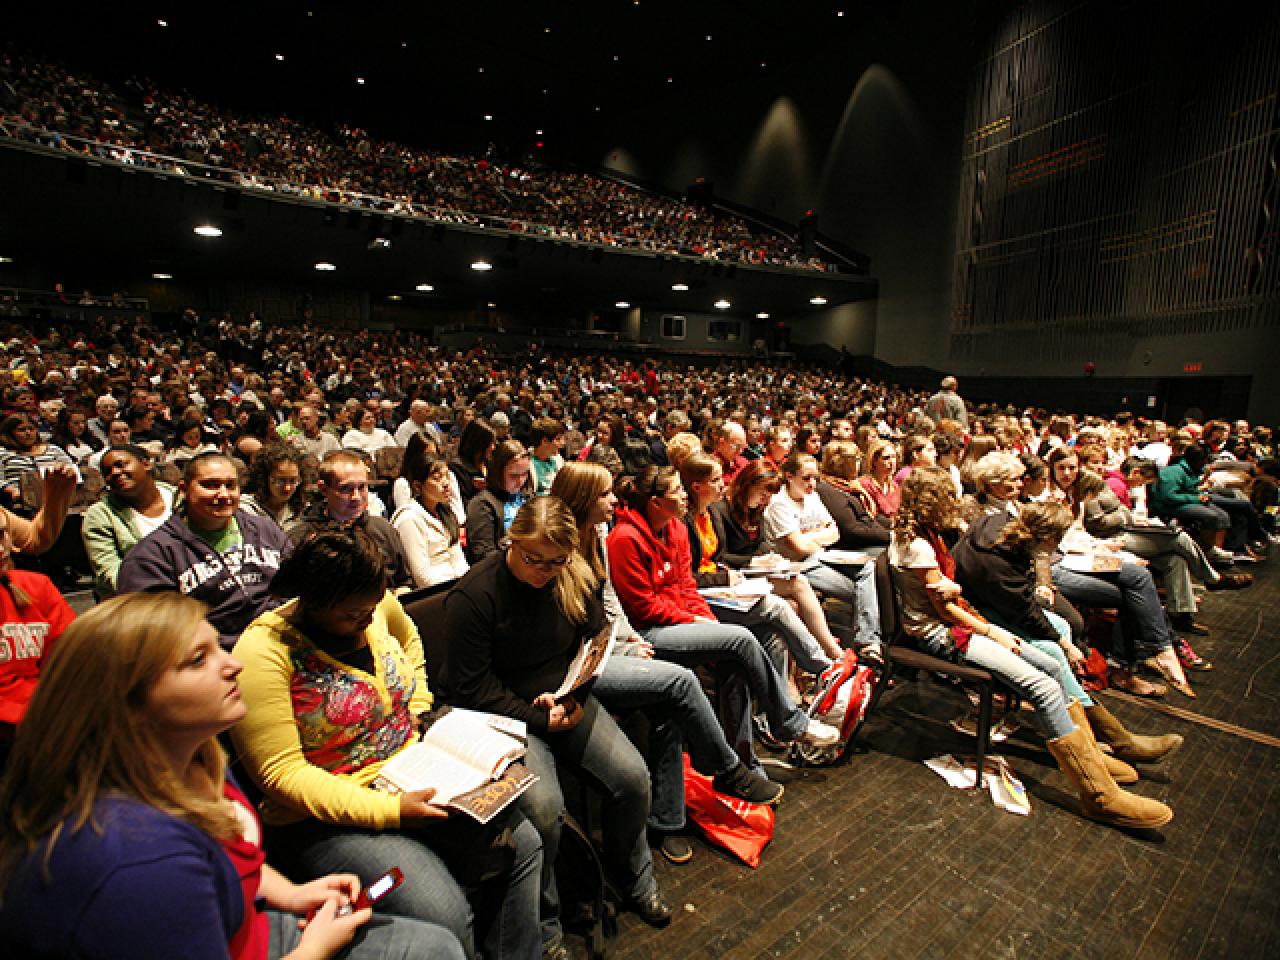 View of the audience seated in Mershon Auditorium